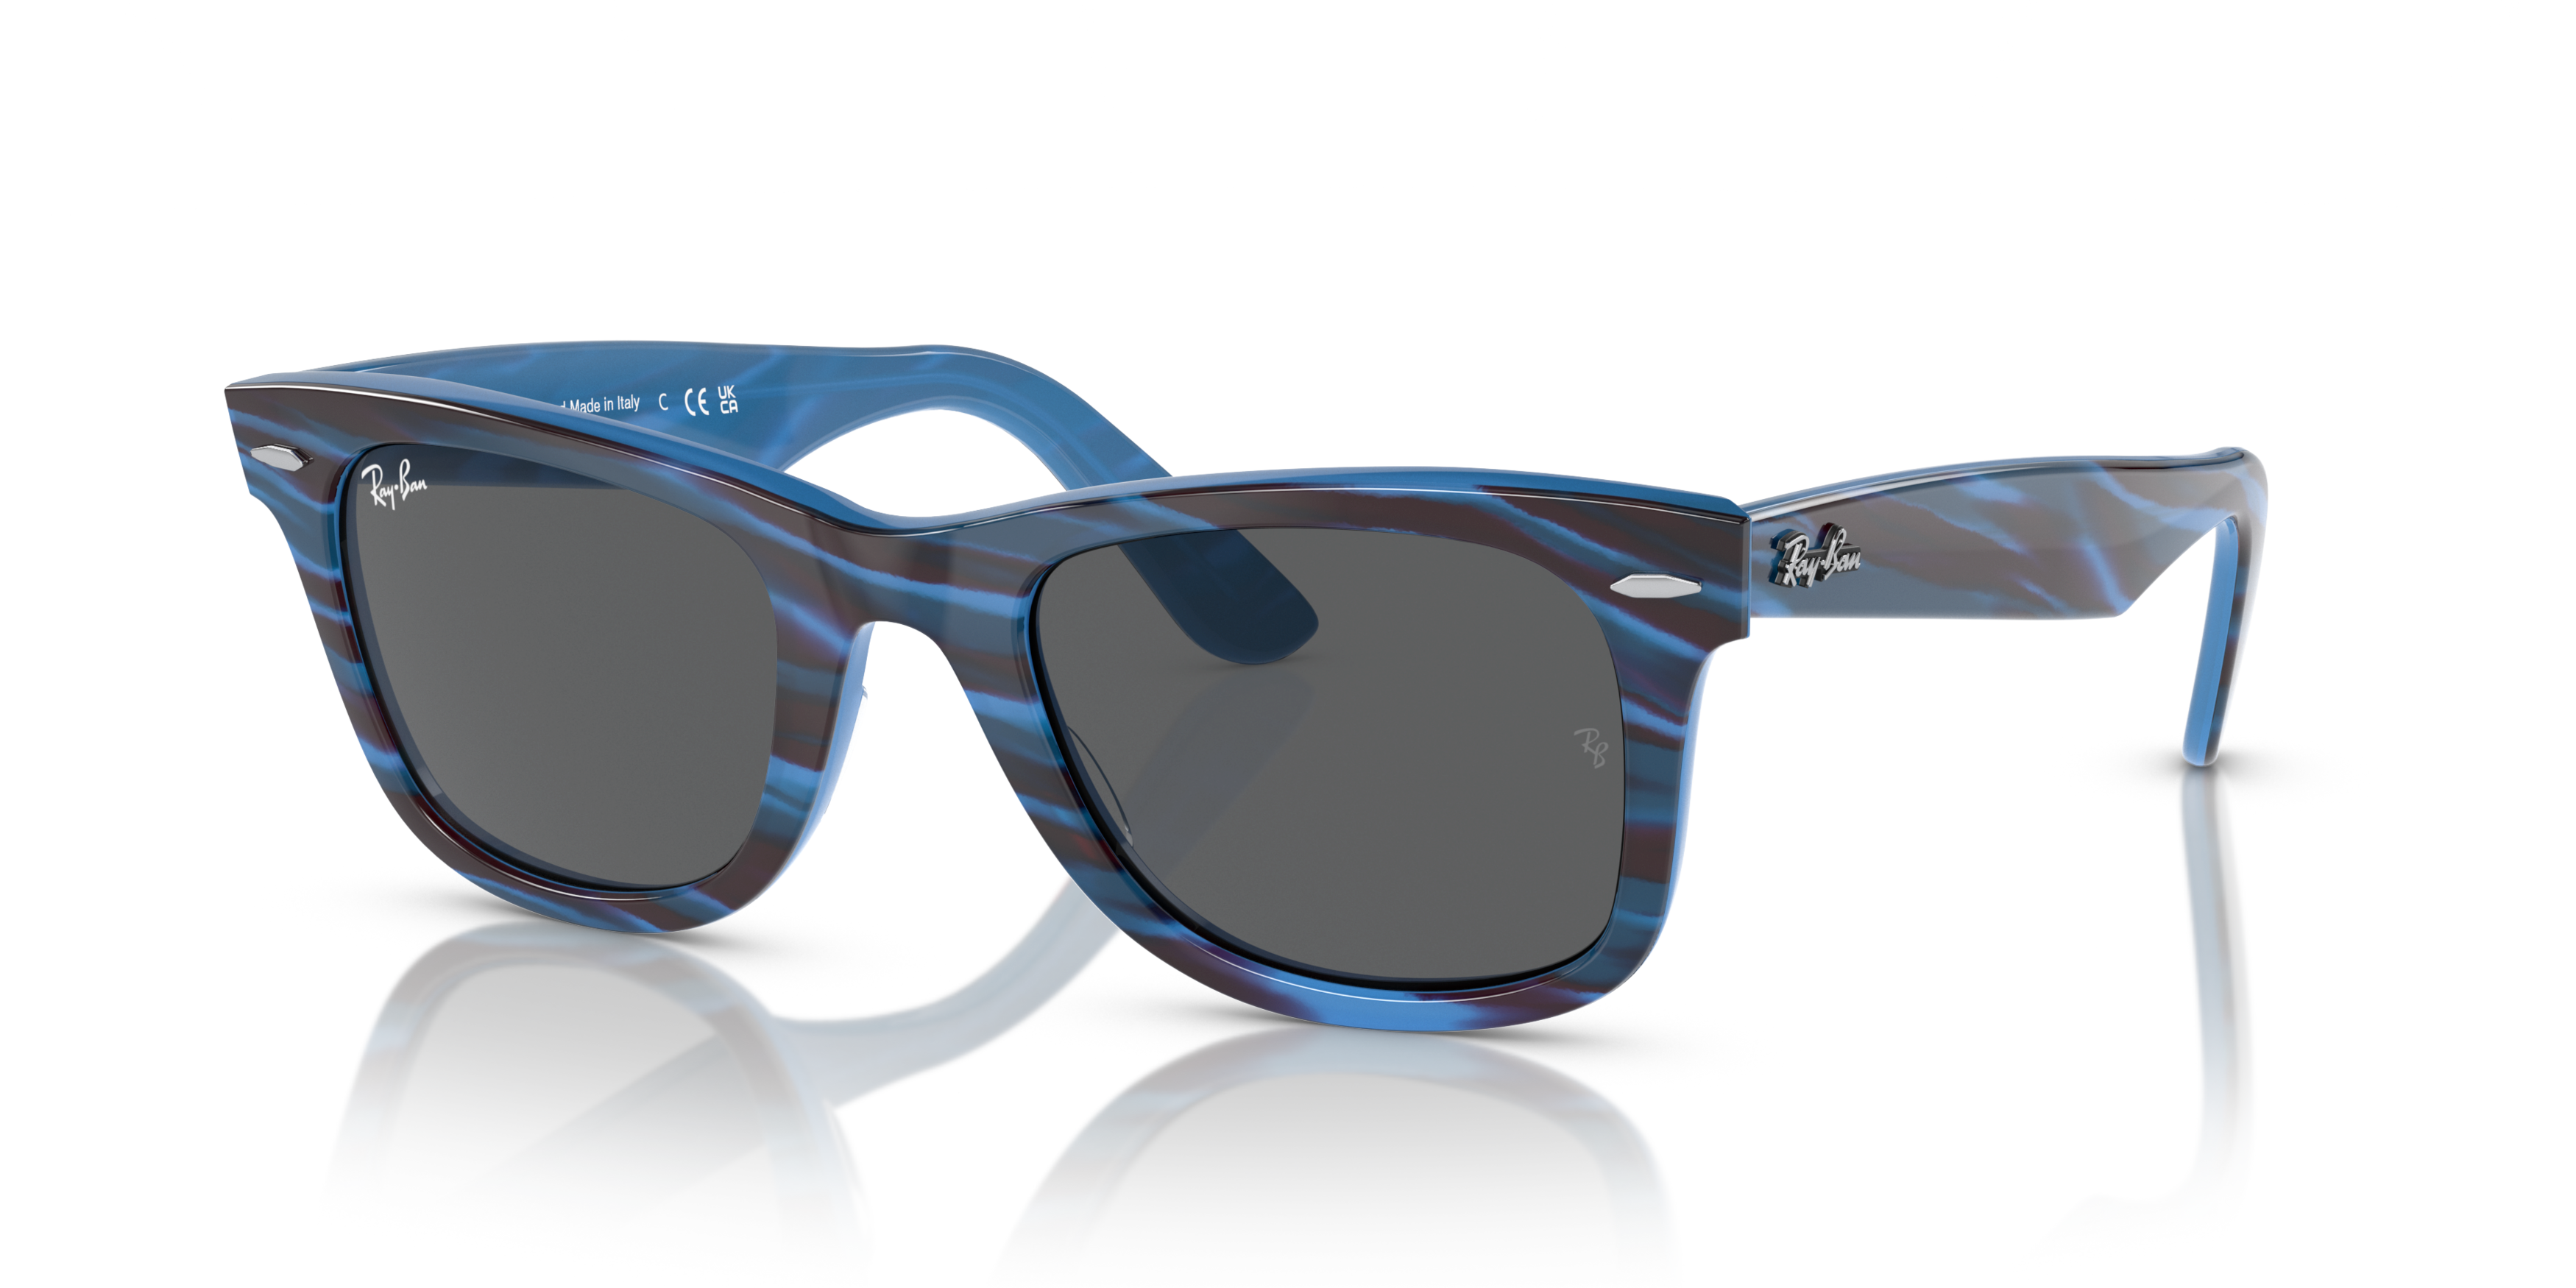 [products.image.detail05] Ray-Ban Wayfarer RB 2140 Sunglasses